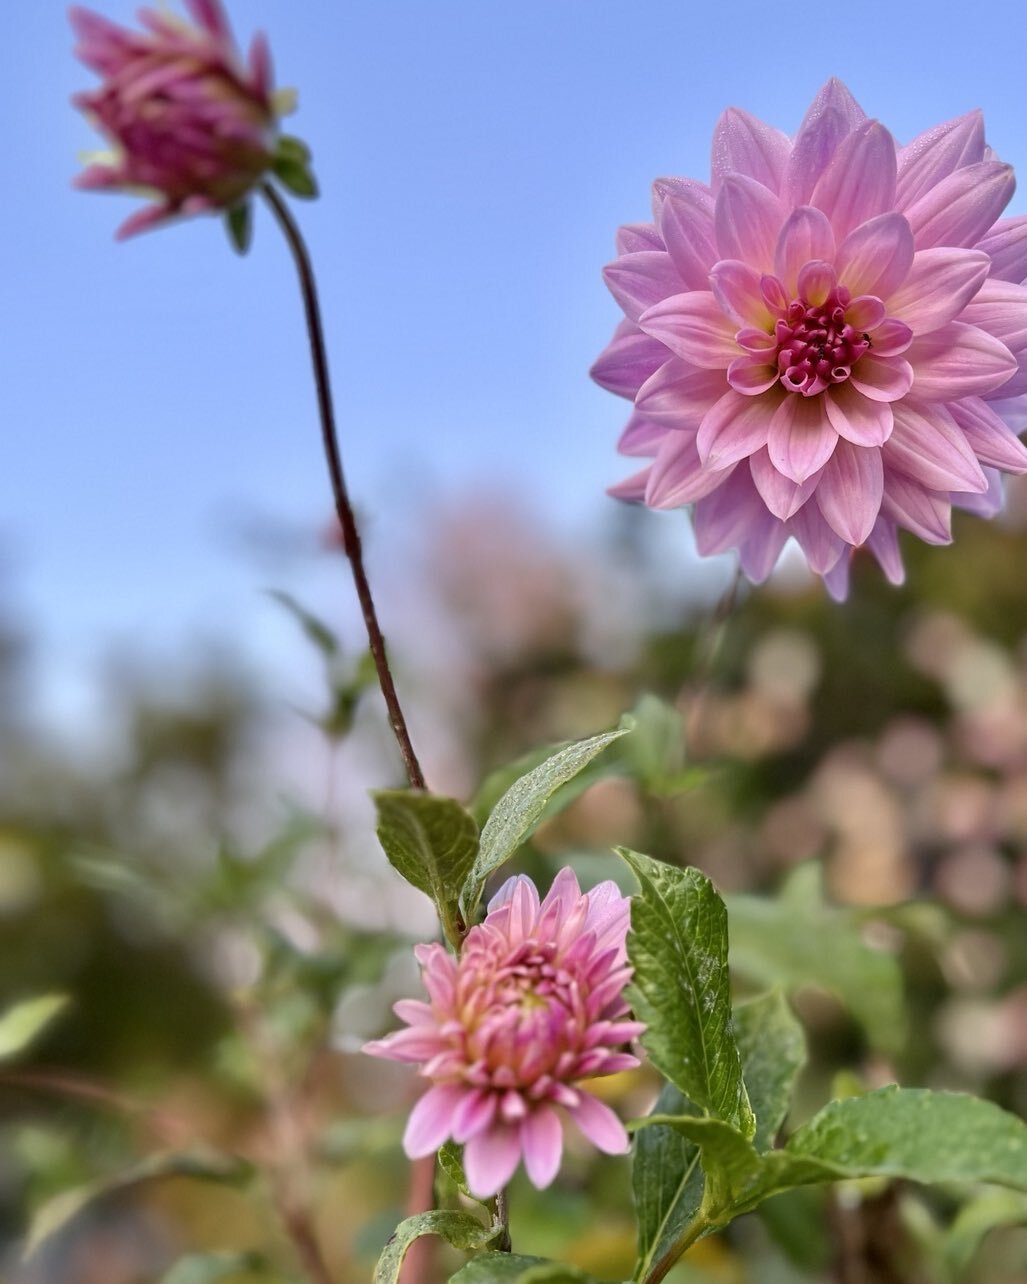 The last of the Dahlias standing tall safe from the frost @autumn-flowers @dahlias in @OrangeNSW